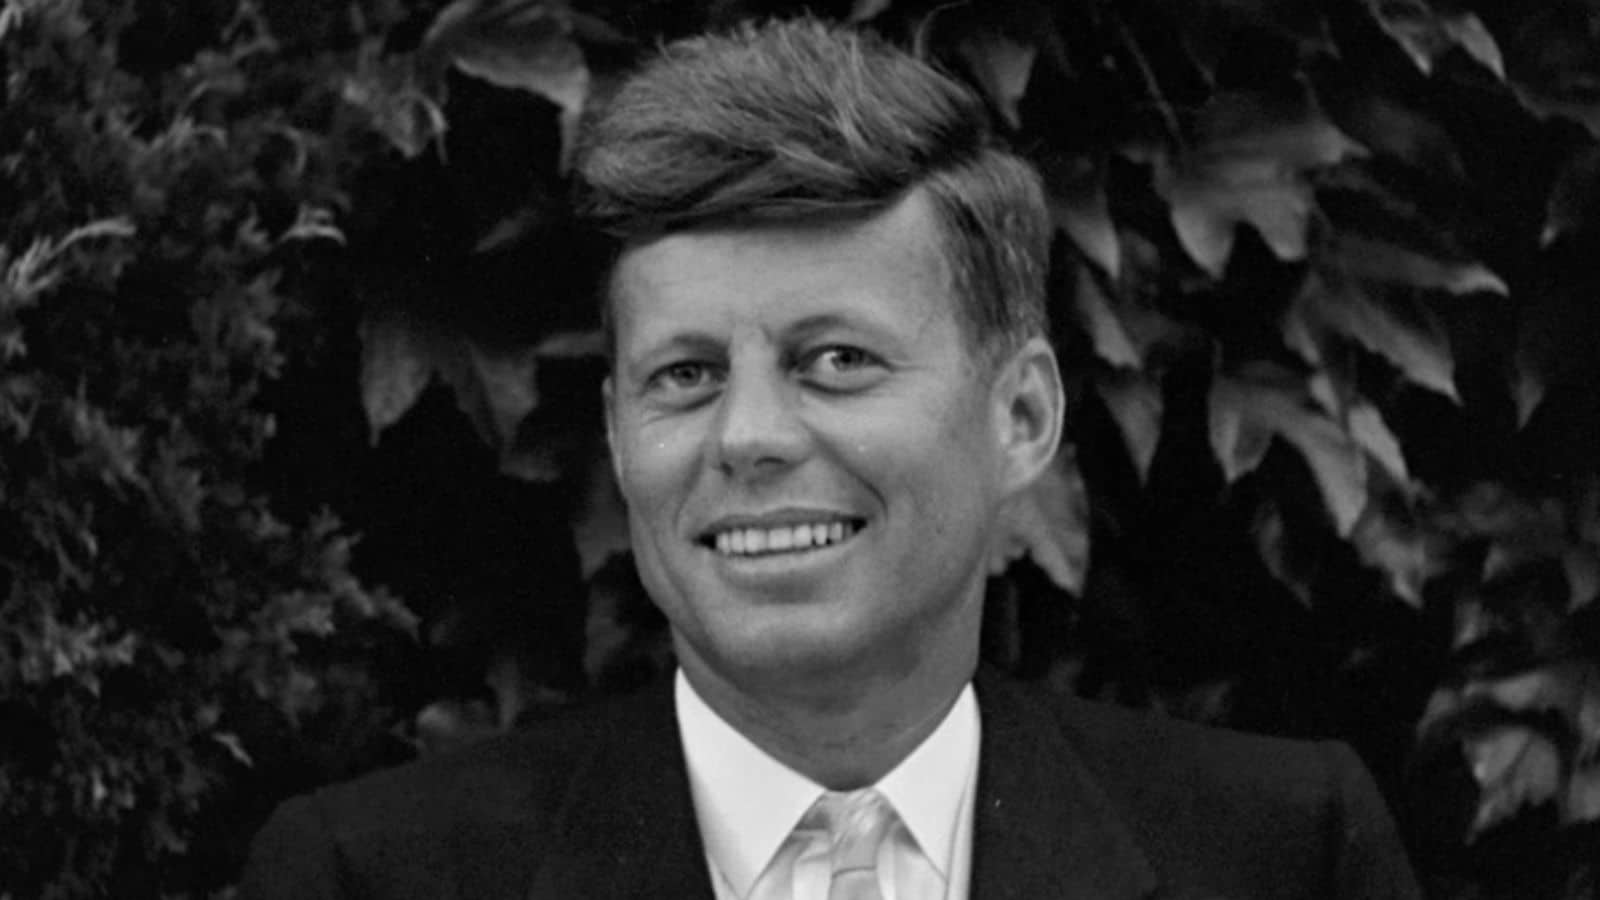 JFK Without a hat